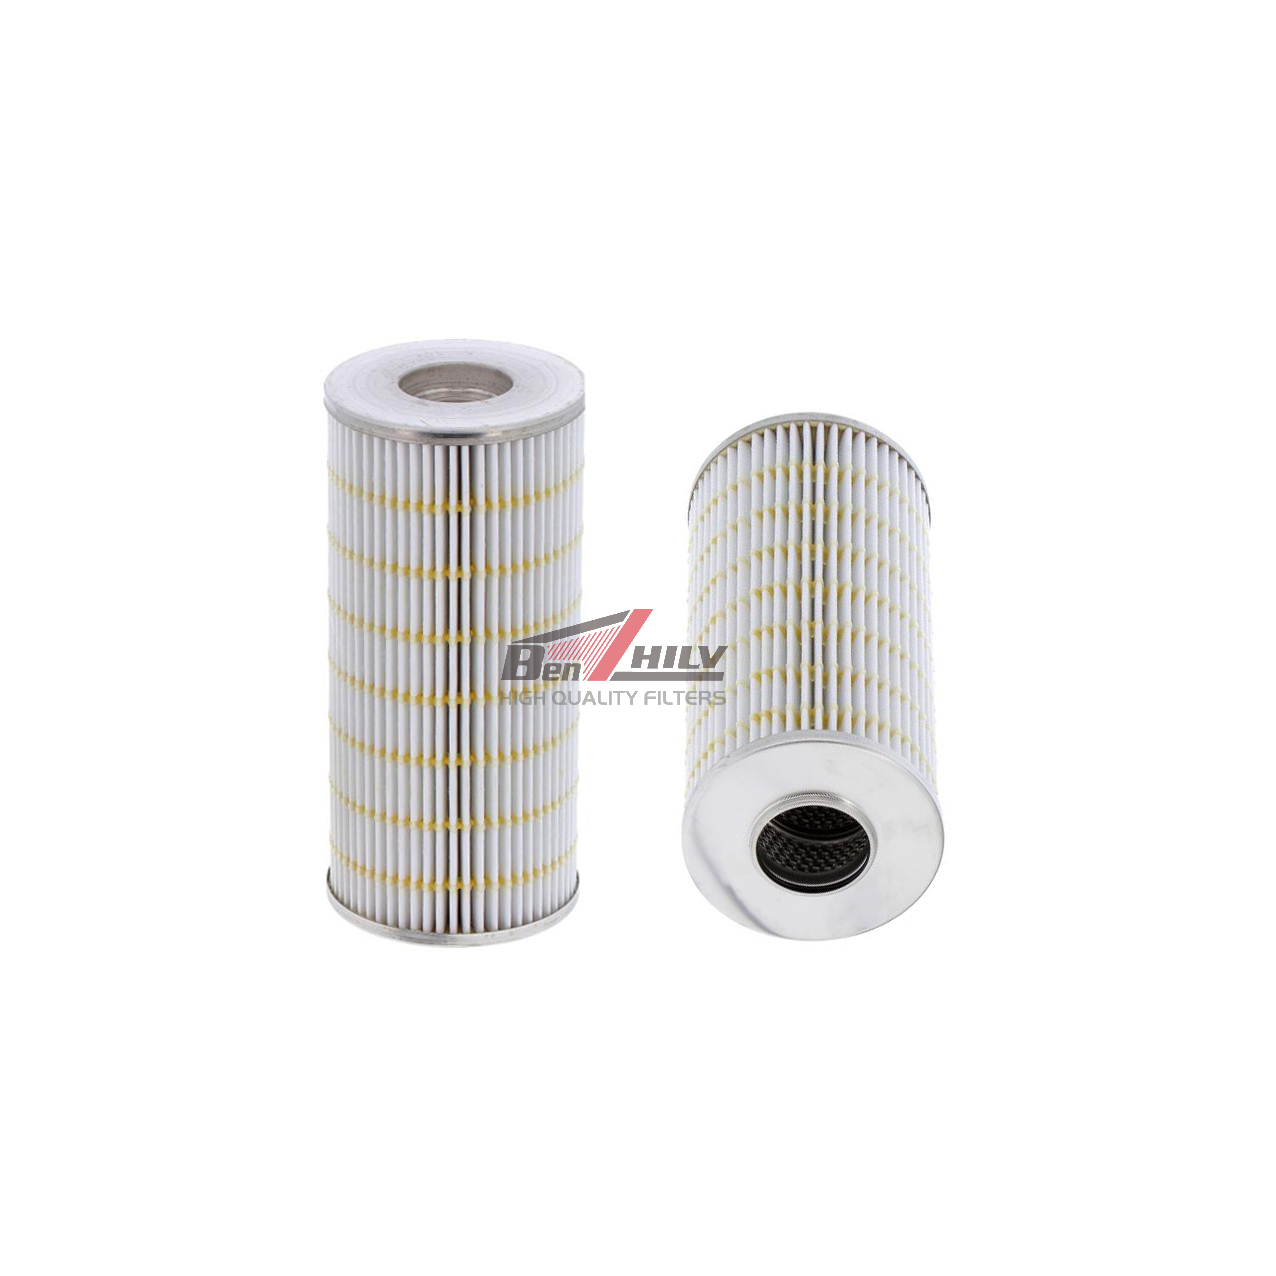 New Delivery for Hydraulic Filter Use for Hitachi Excavator (4630525) Sfh 8670 5I-8670